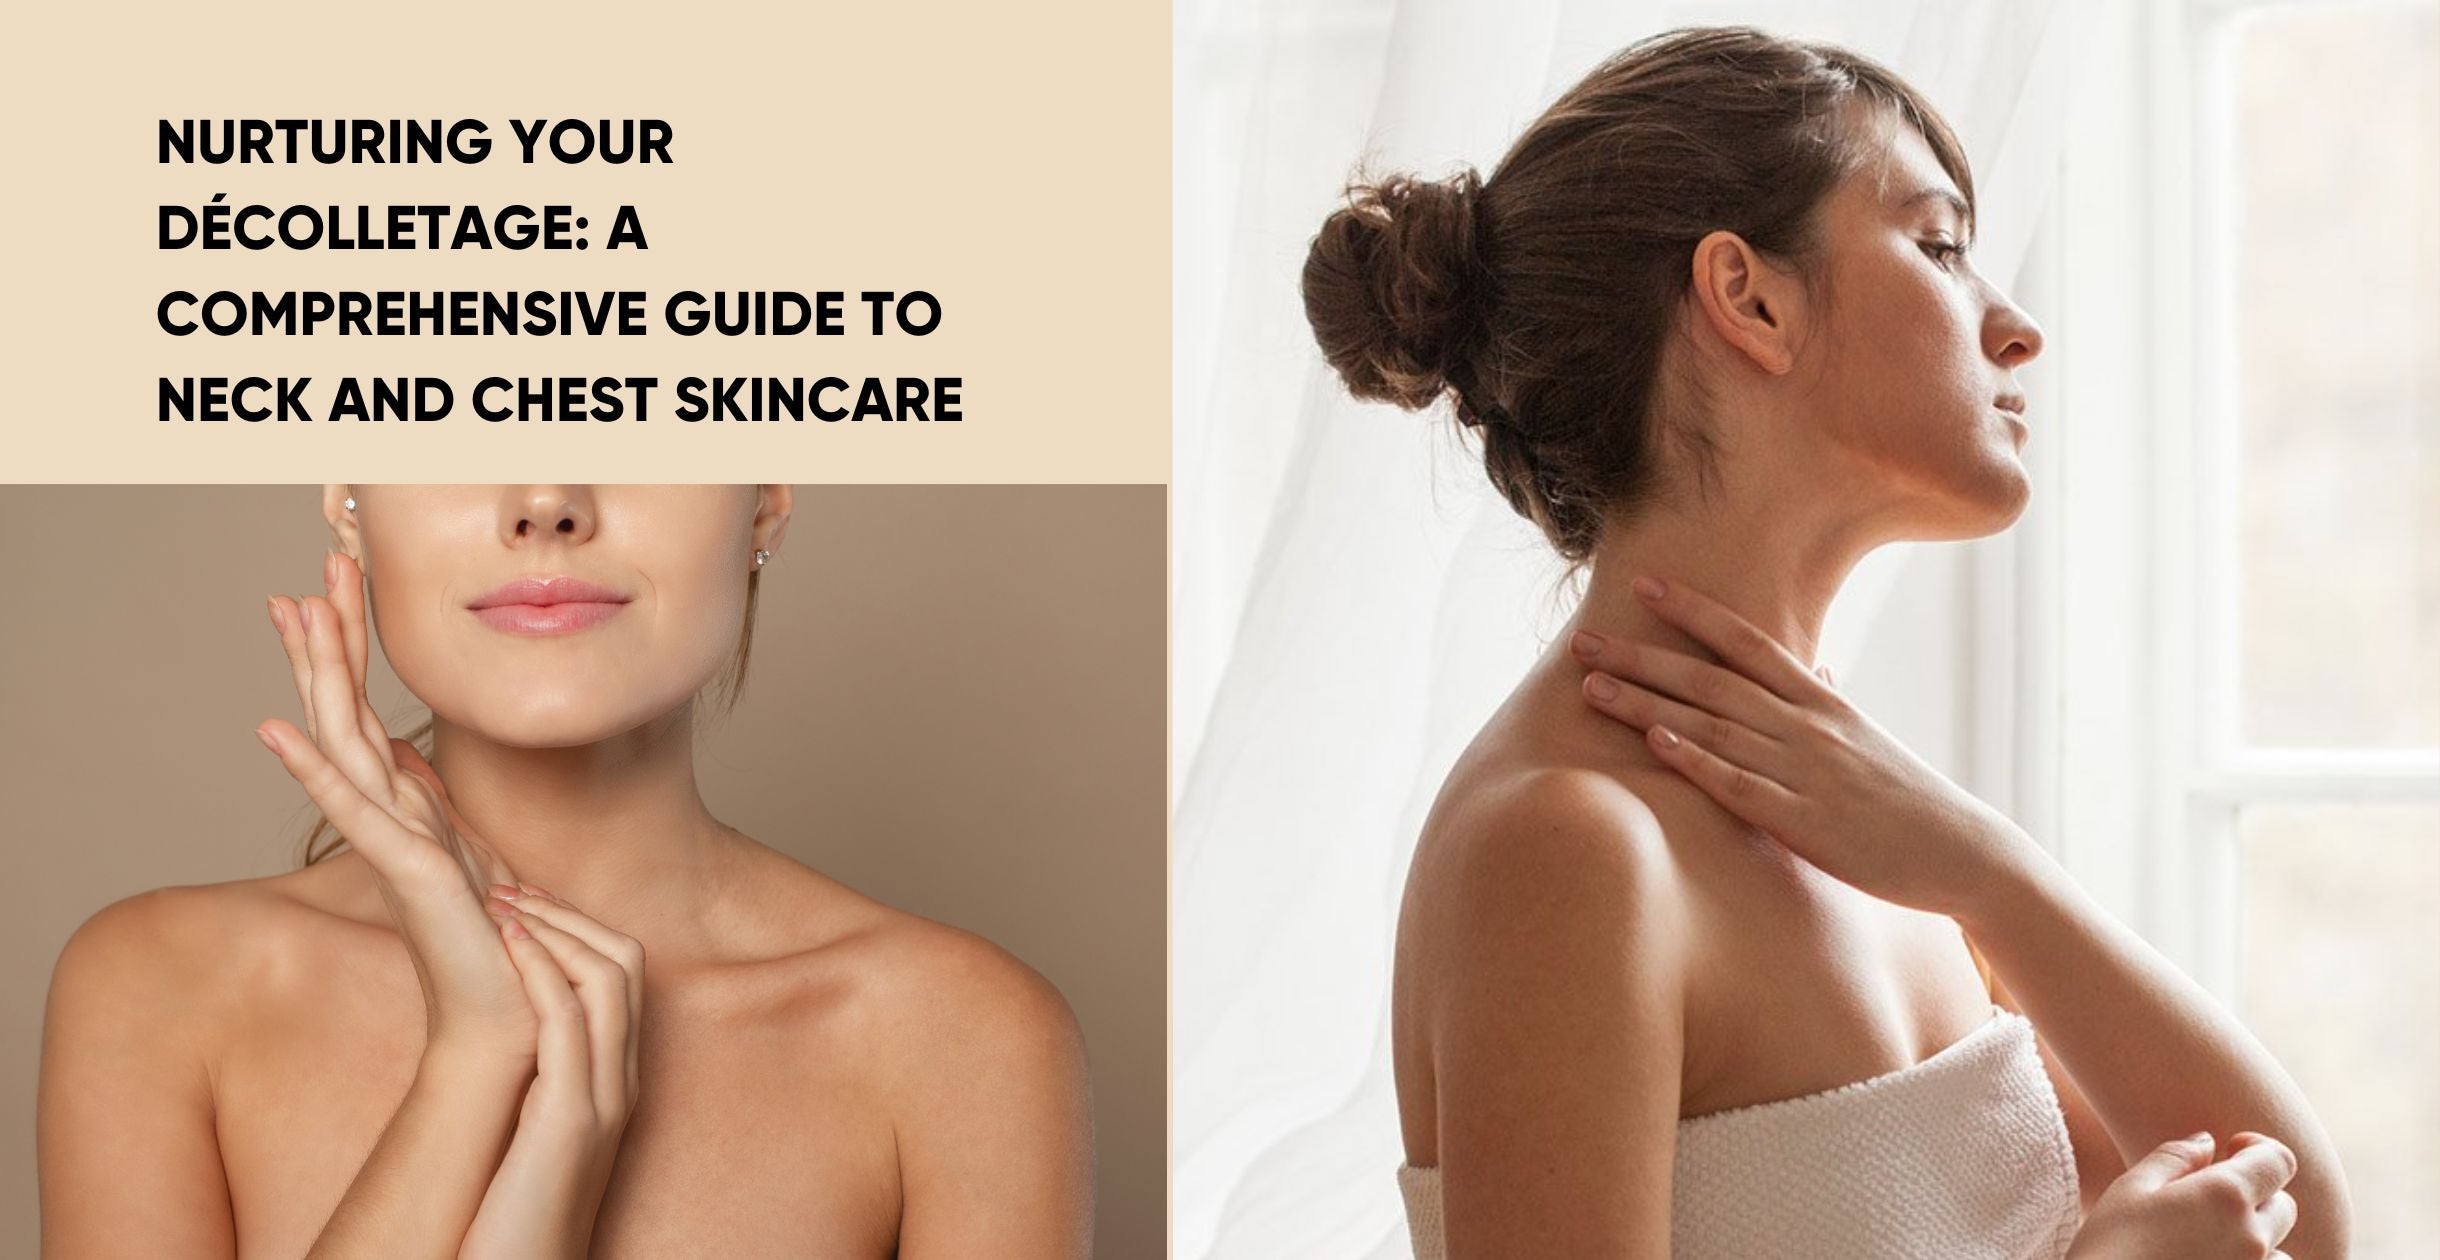 Nurturing Your Décolletage: A Comprehensive Guide to Neck and Chest Skincare